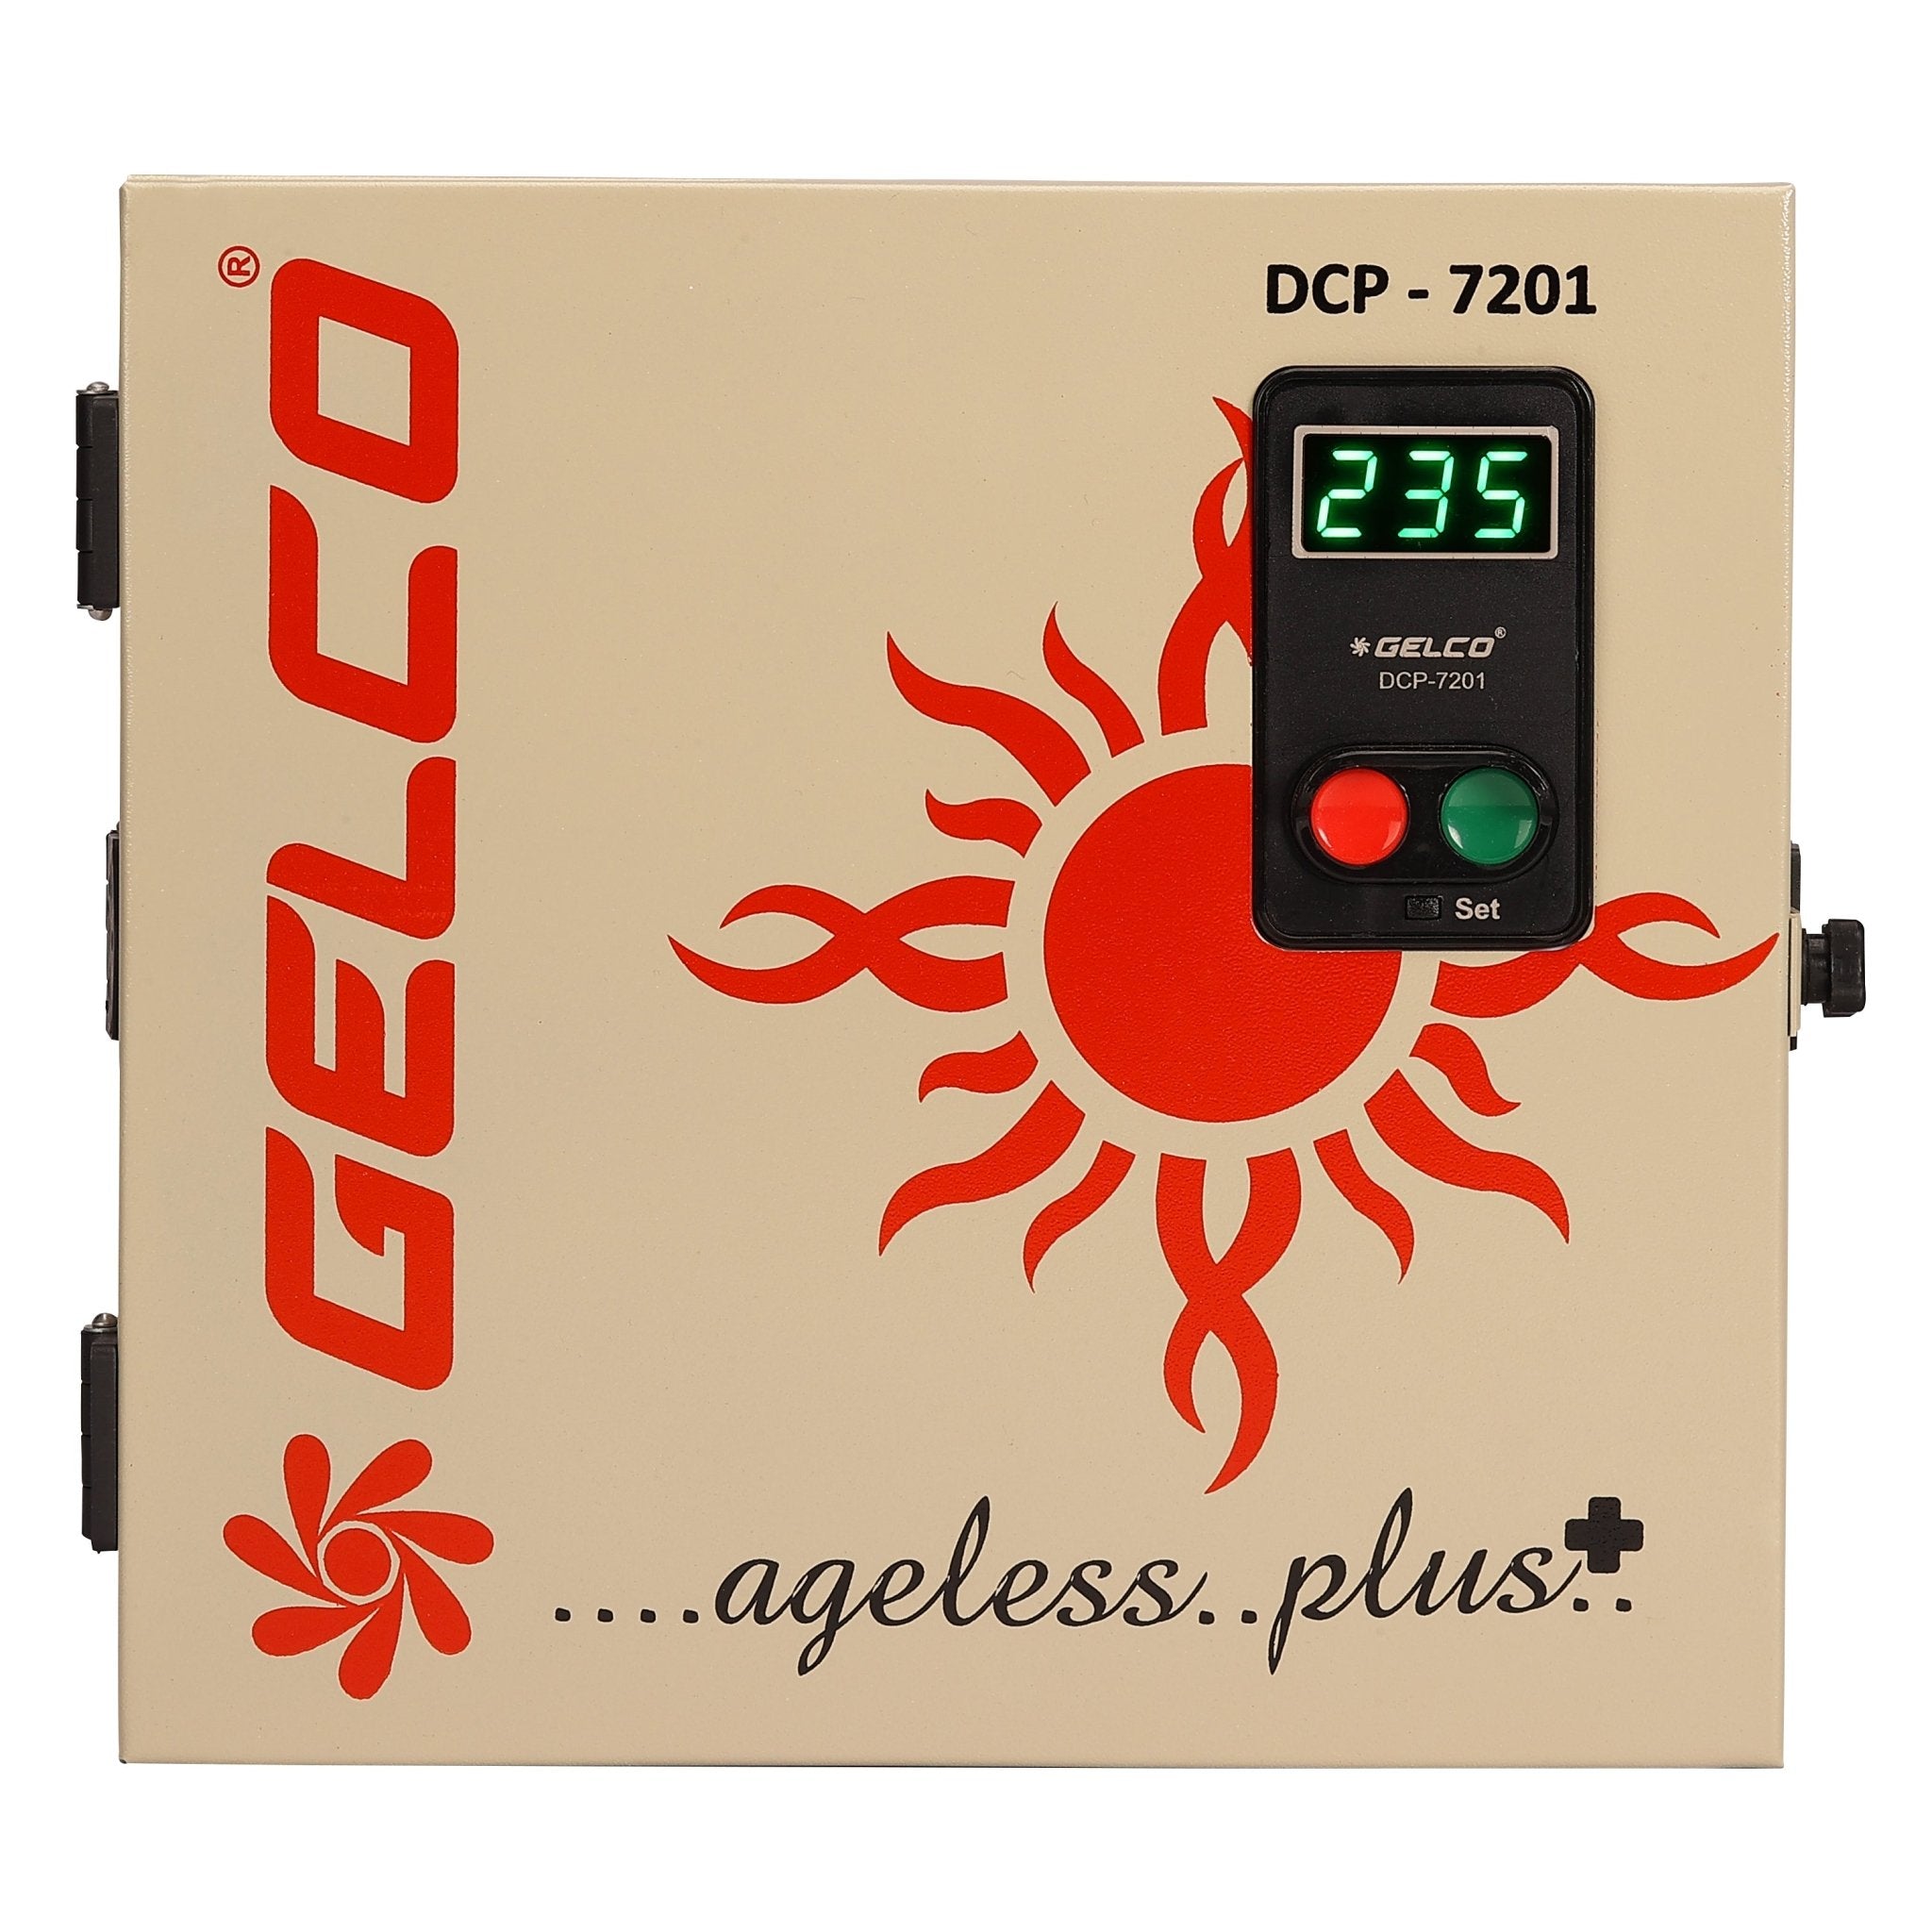 DCP 7201, Motor Starter & Control Panel, Operates and Protects All Kinds Of Submersible Motors and Pumps, Auto On/Off Function, Full Protection Against Voltage Fluctuations/Overheating/Burning, With Accurate Digital Display, 230V 50Hz - Gelco Electronics Pvt. Ltd.